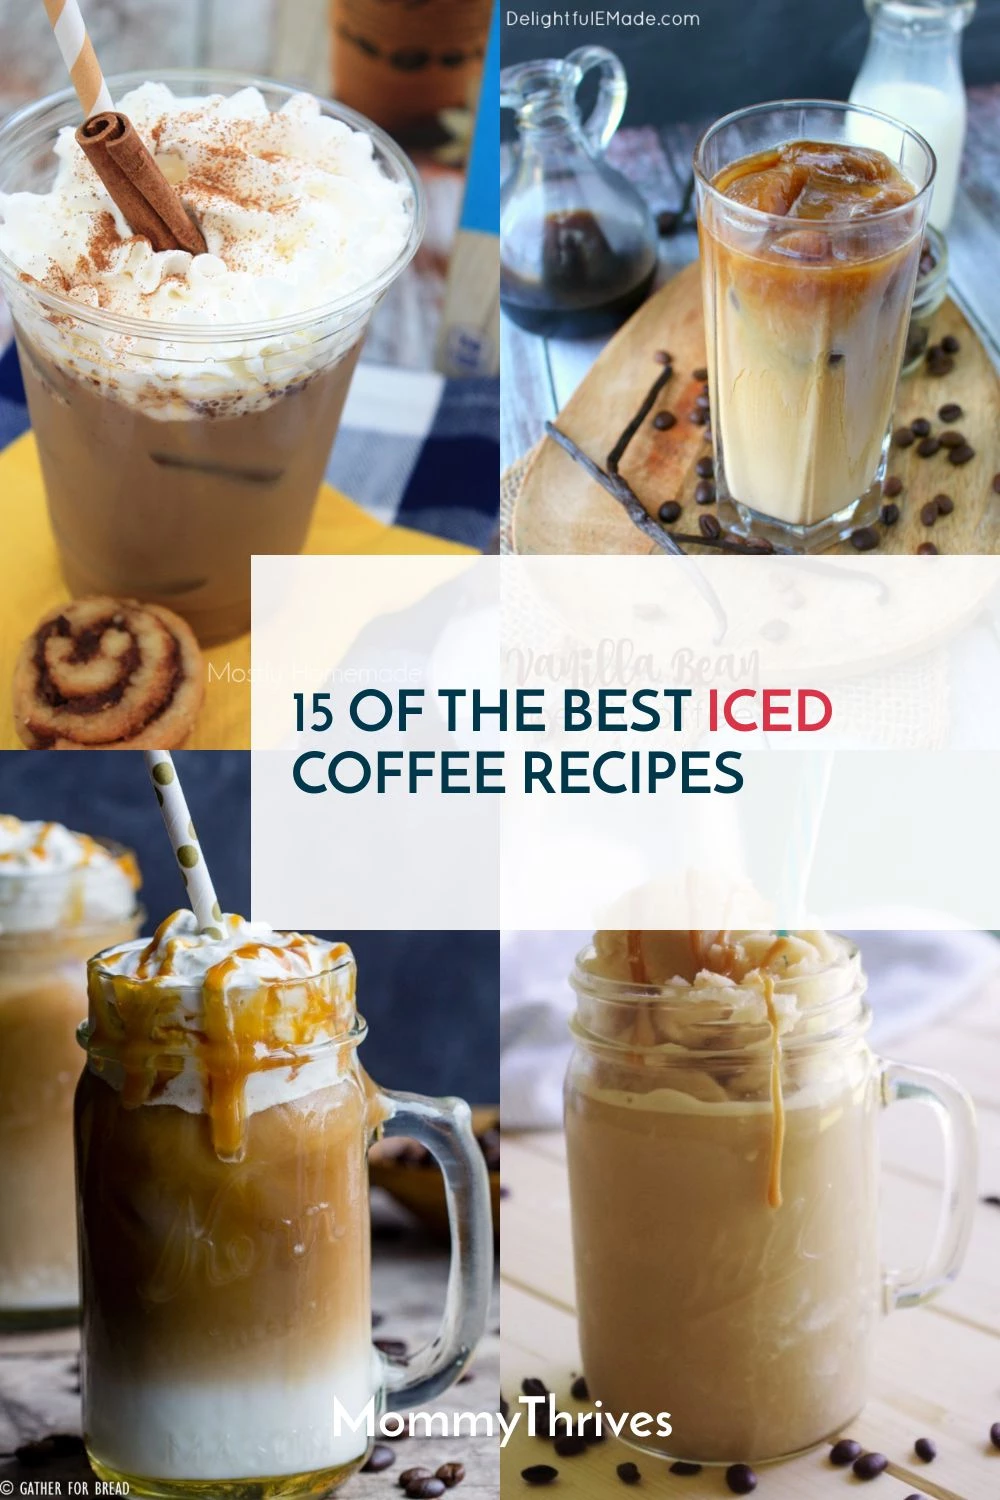 https://www.mommythrives.com/wp-content/uploads/2018/07/Coffee-Recipes-To-Battle-Summer-Heat-Delicious-Iced-Coffee-Recipes-Iced-Coffee-Recipes.webp